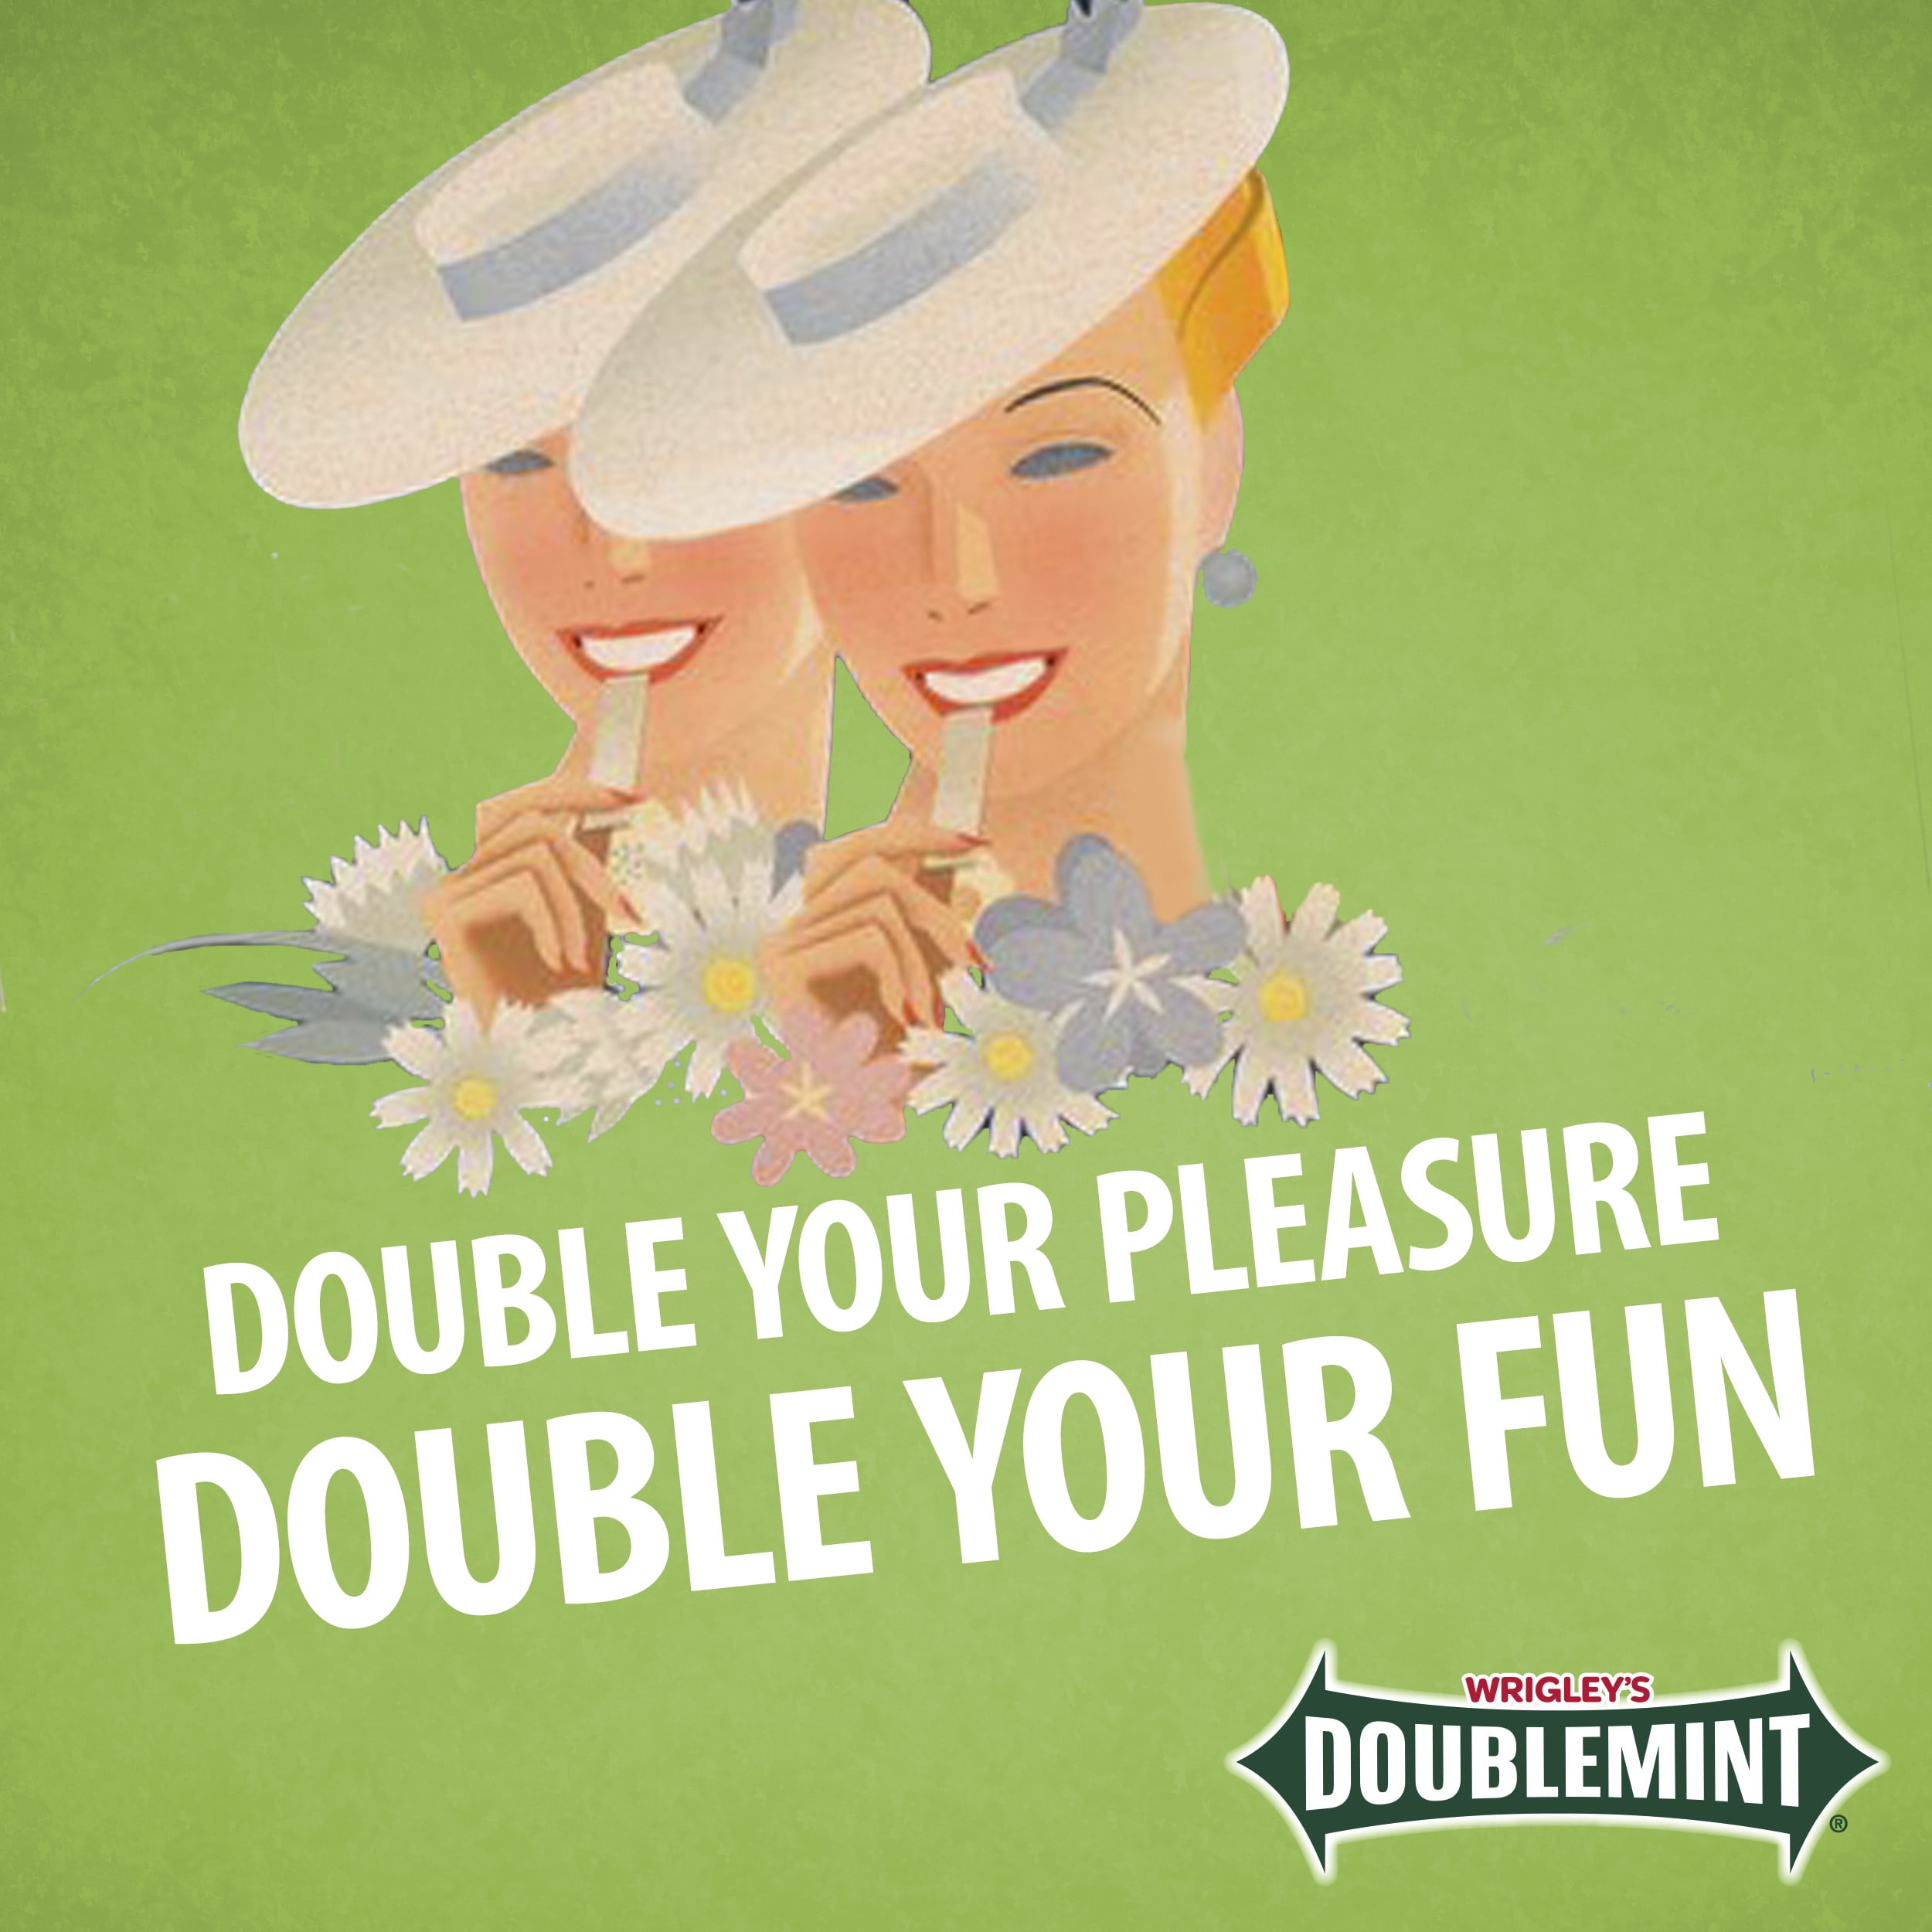 Image result for double your pleasure double your fun